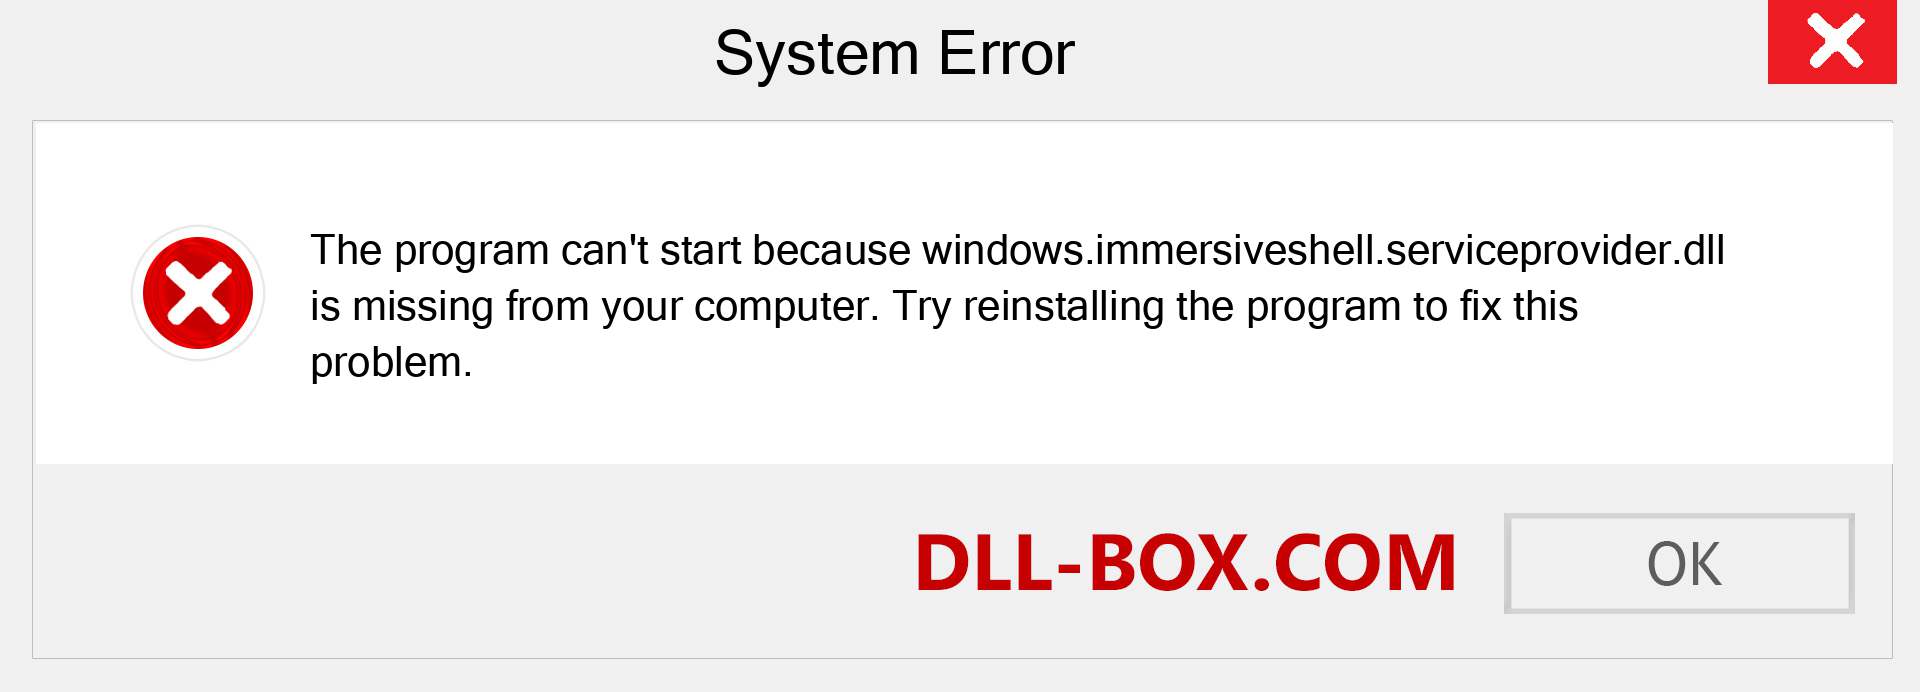  windows.immersiveshell.serviceprovider.dll file is missing?. Download for Windows 7, 8, 10 - Fix  windows.immersiveshell.serviceprovider dll Missing Error on Windows, photos, images